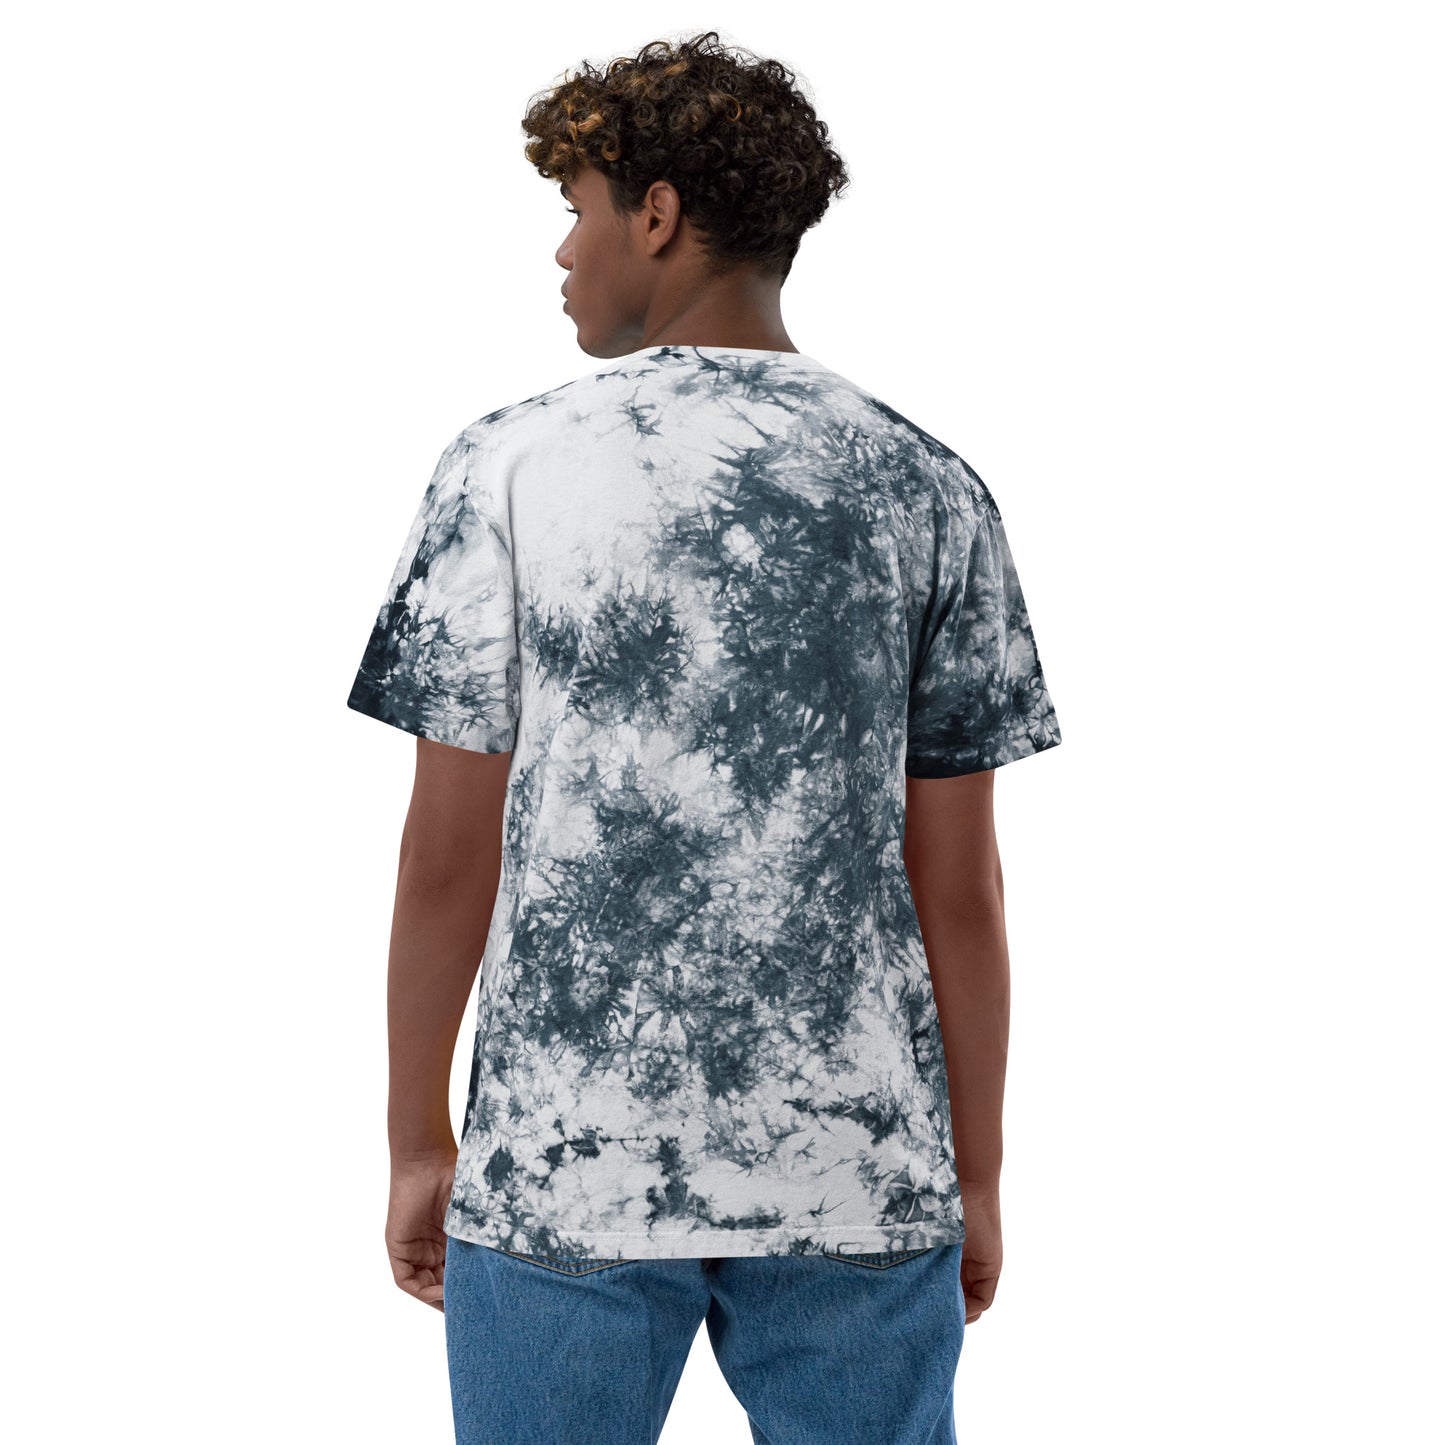 Blerd Con Embroidered Oversized tie-dye t-shirt